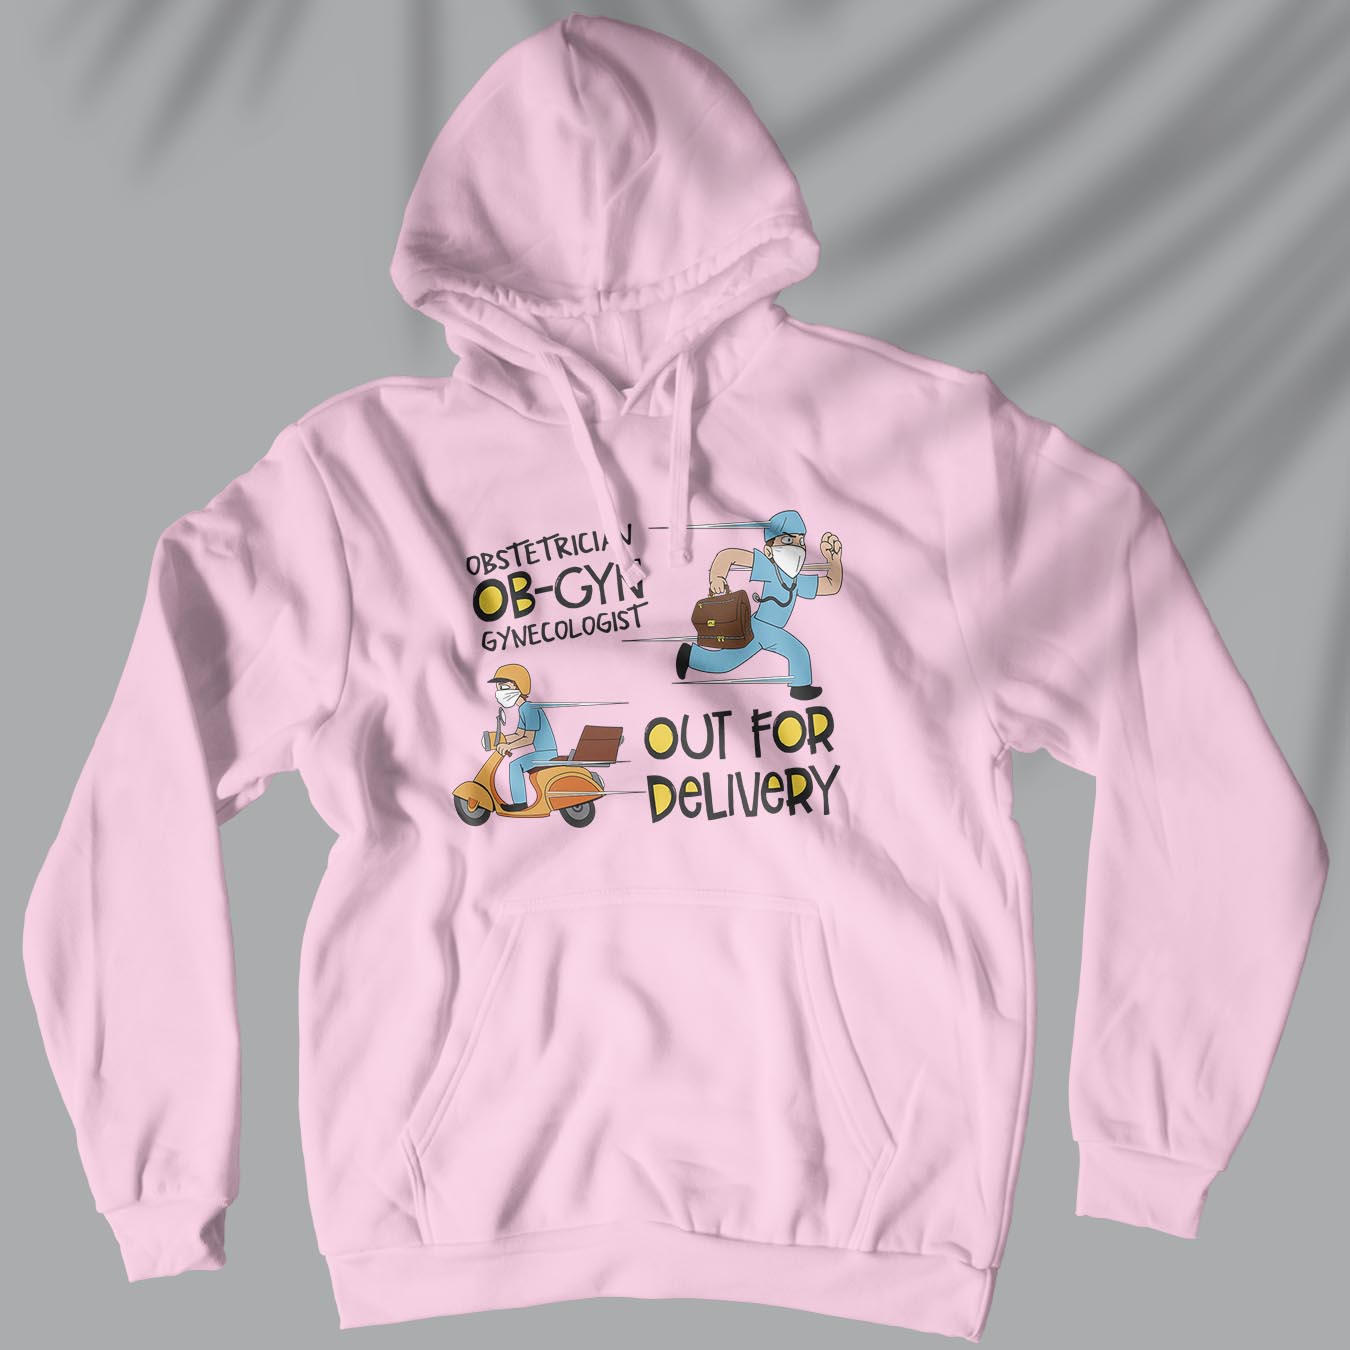 OB-GYN - Out For Delivery - Unisex Hoodie